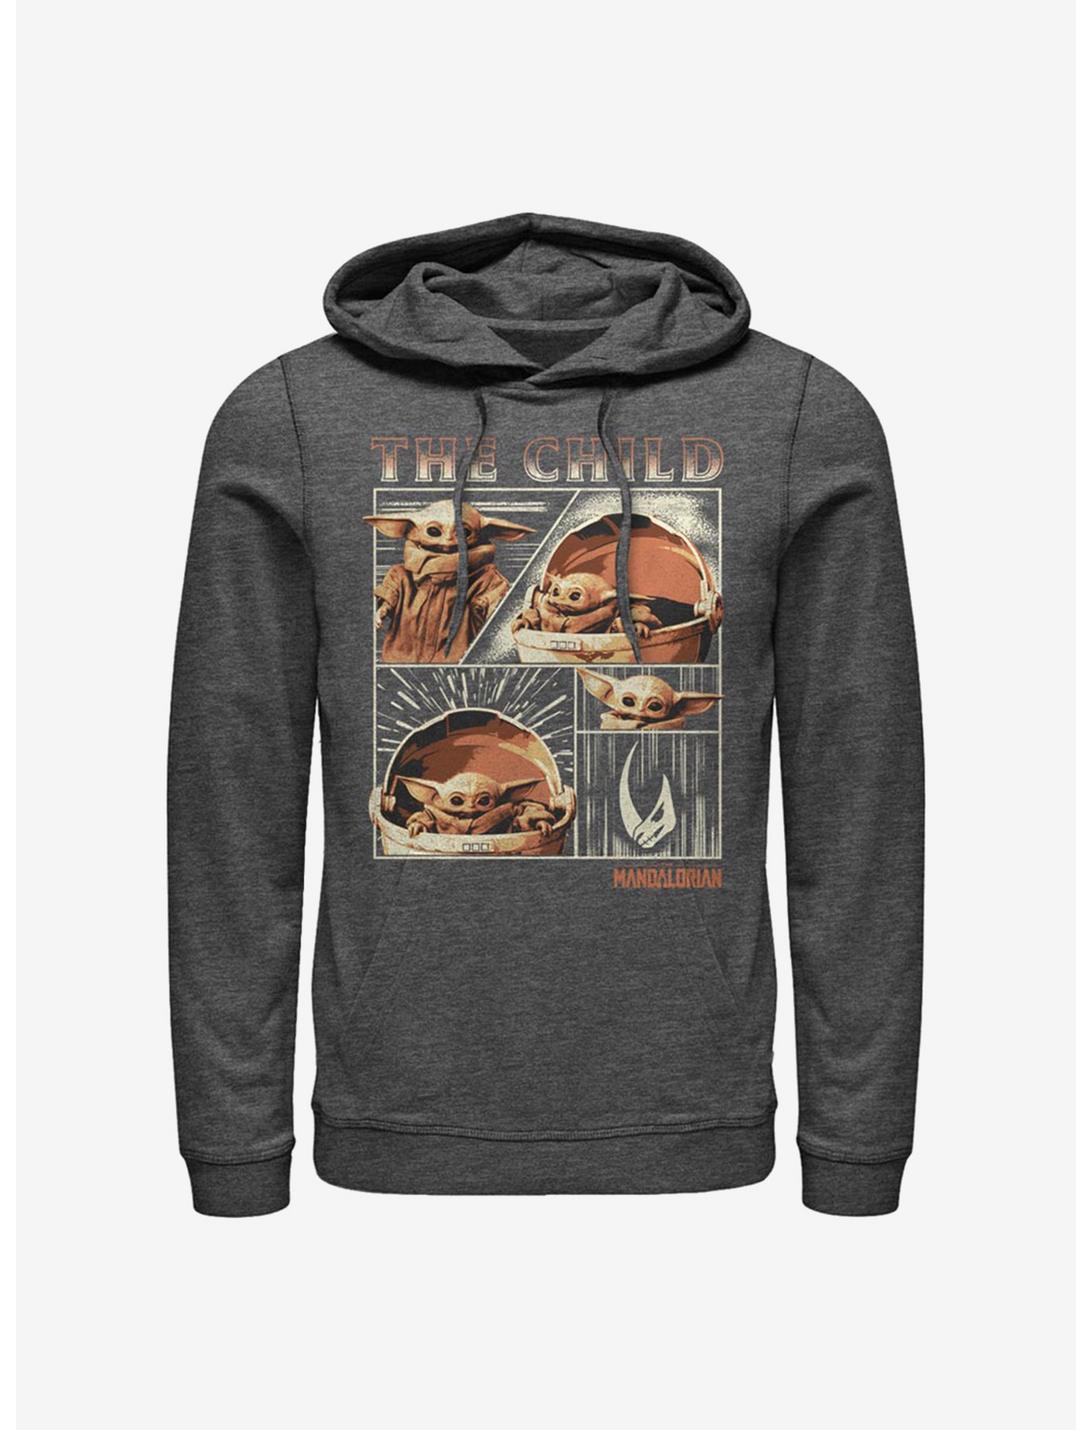 Star Wars The Mandalorian The Child Panel Hoodie, CHAR HTR, hi-res